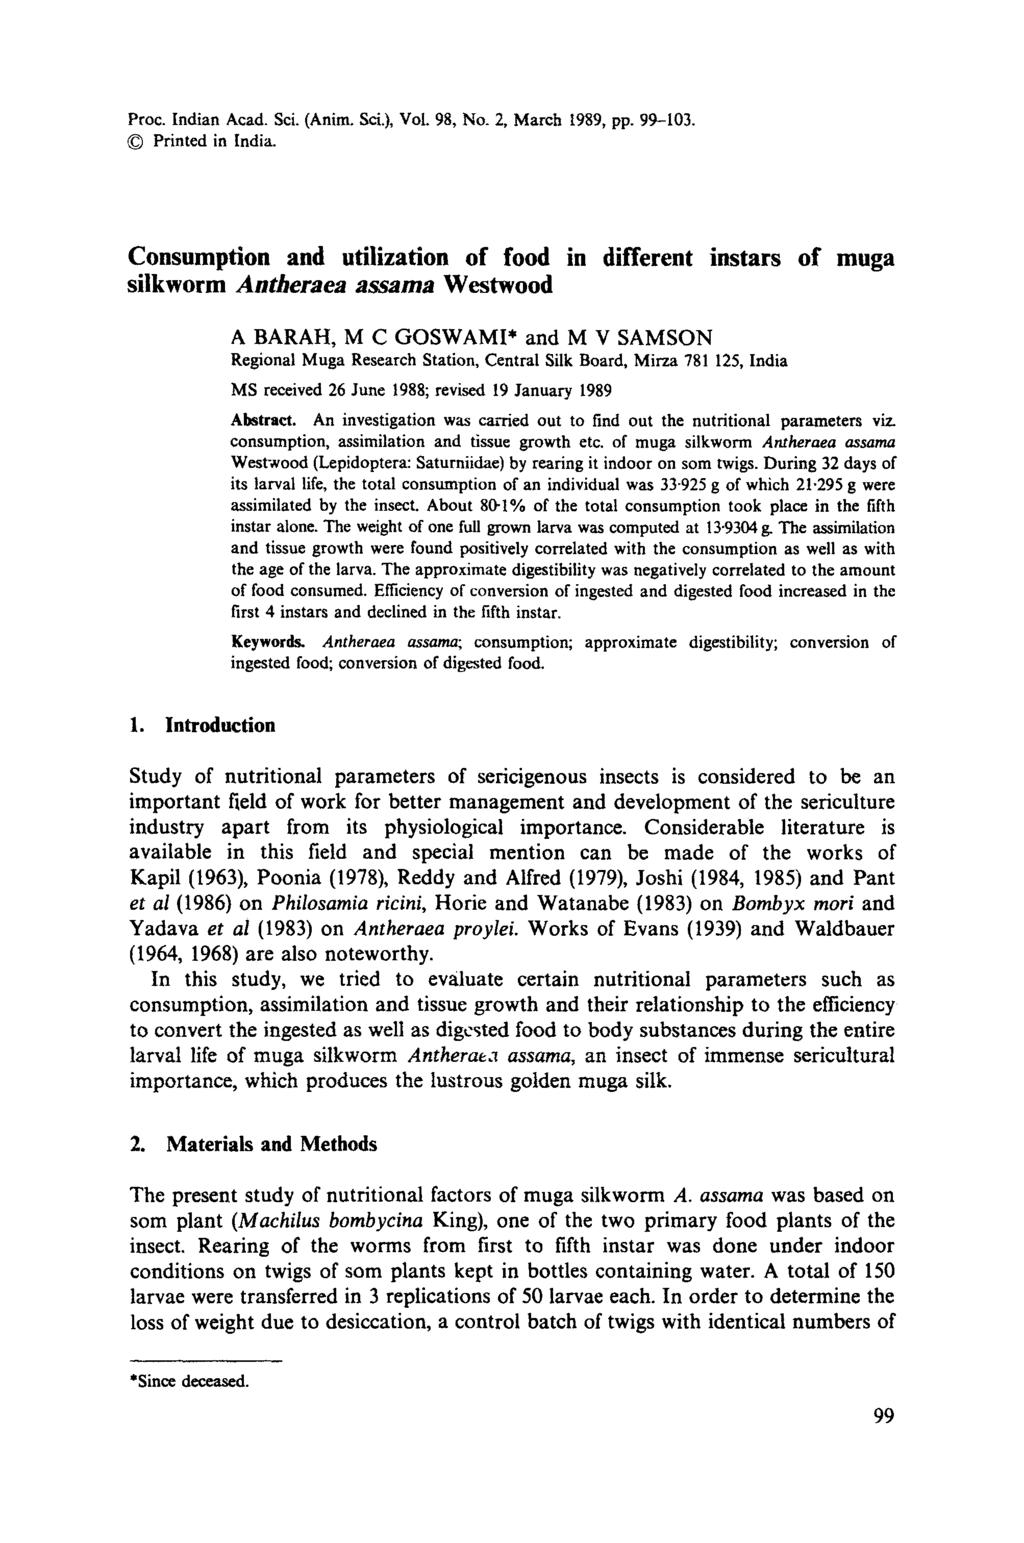 Proc. Indian Acad. Sci. (Anim. Sci.), Vol. 98, No.2, March 1989, pp. 99-103. Printed in India.